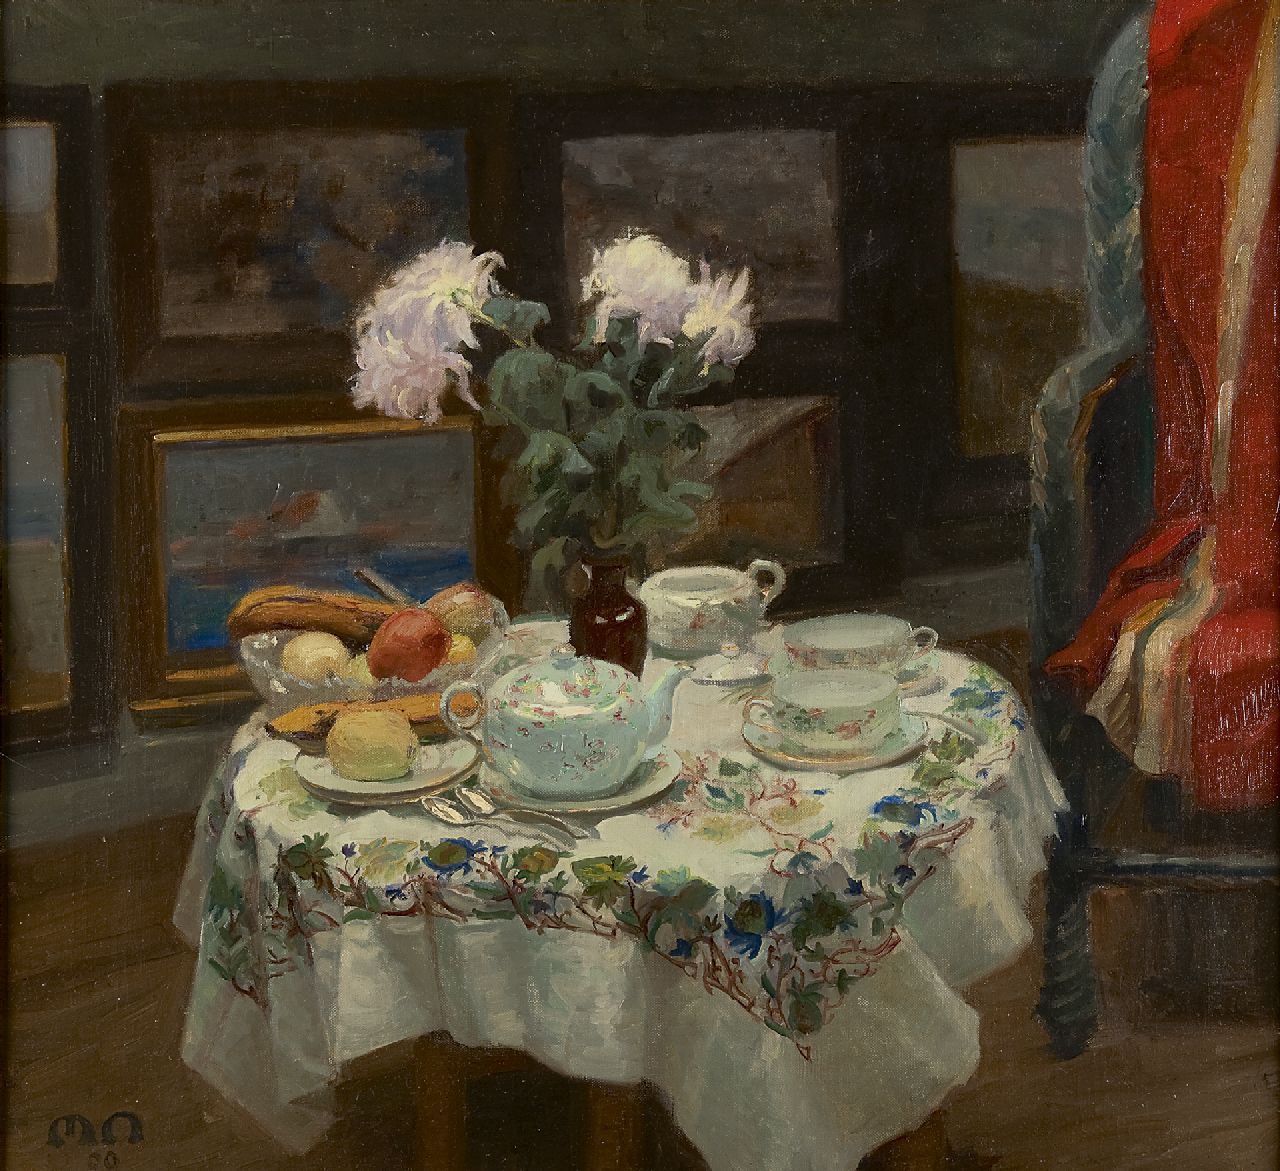 Nathan M.L.M.  | 'Max' Ludvig Michael Nathan | Paintings offered for sale | The tea table, oil on canvas 69.2 x 75.1 cm, signed l.l. with initials and dated '09